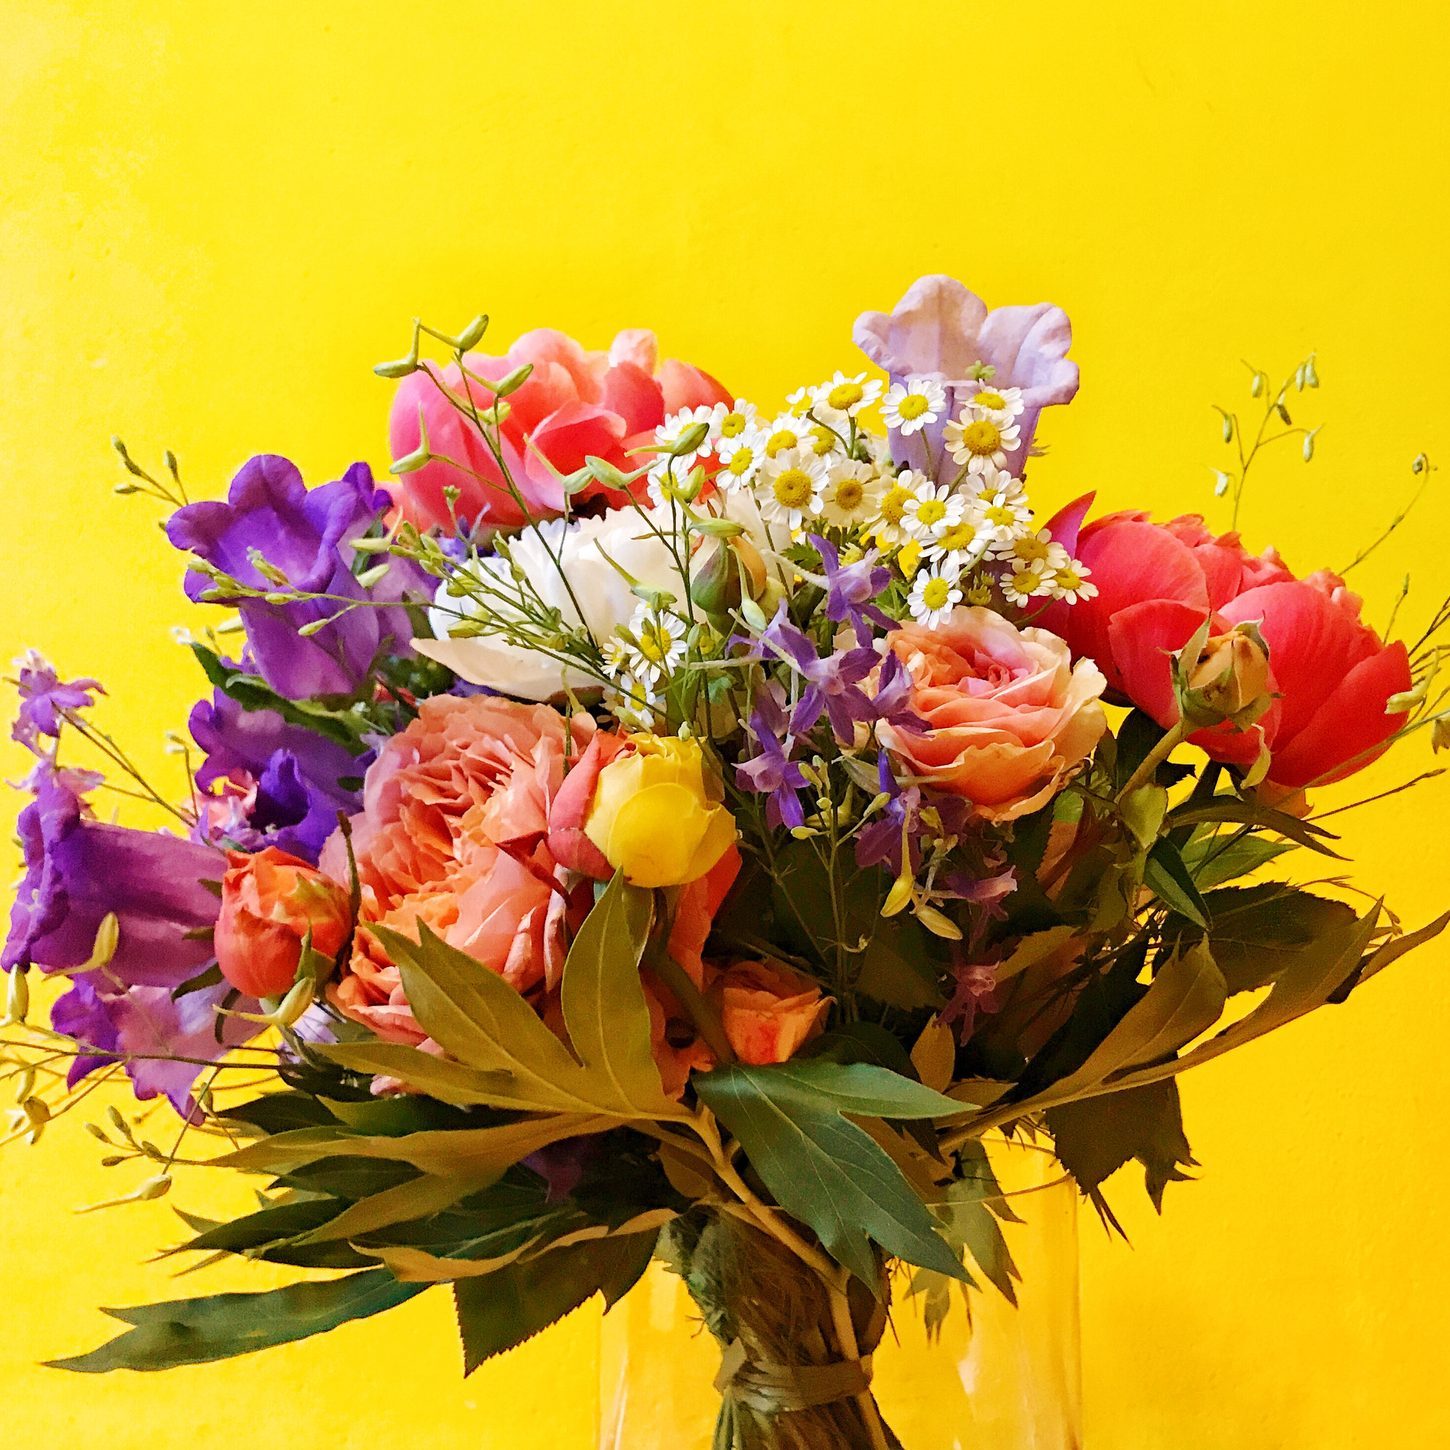 Close-Up Of Flower Bouquet Against Yellow Background